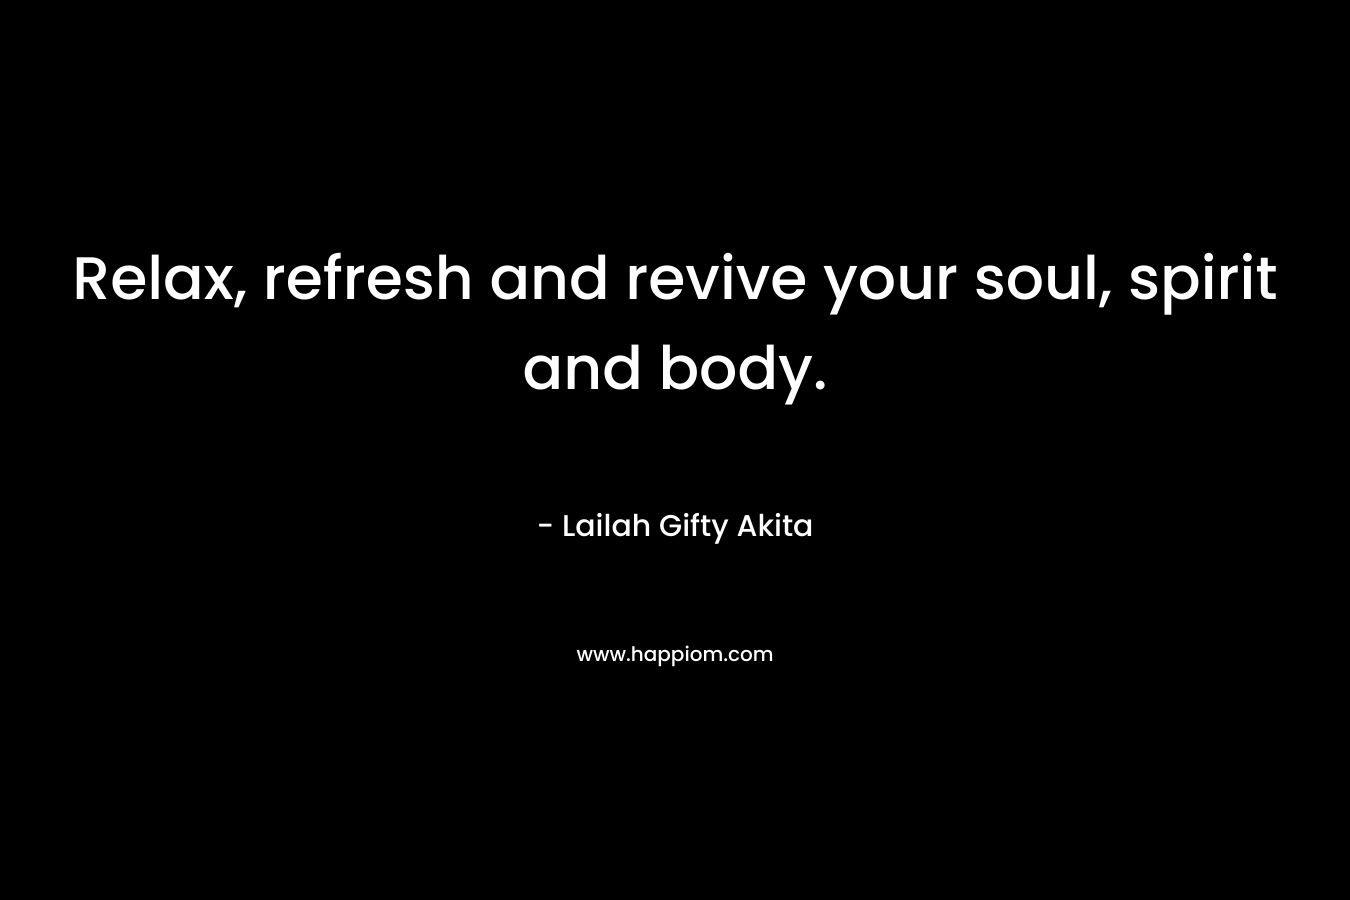 Relax, refresh and revive your soul, spirit and body. – Lailah Gifty Akita